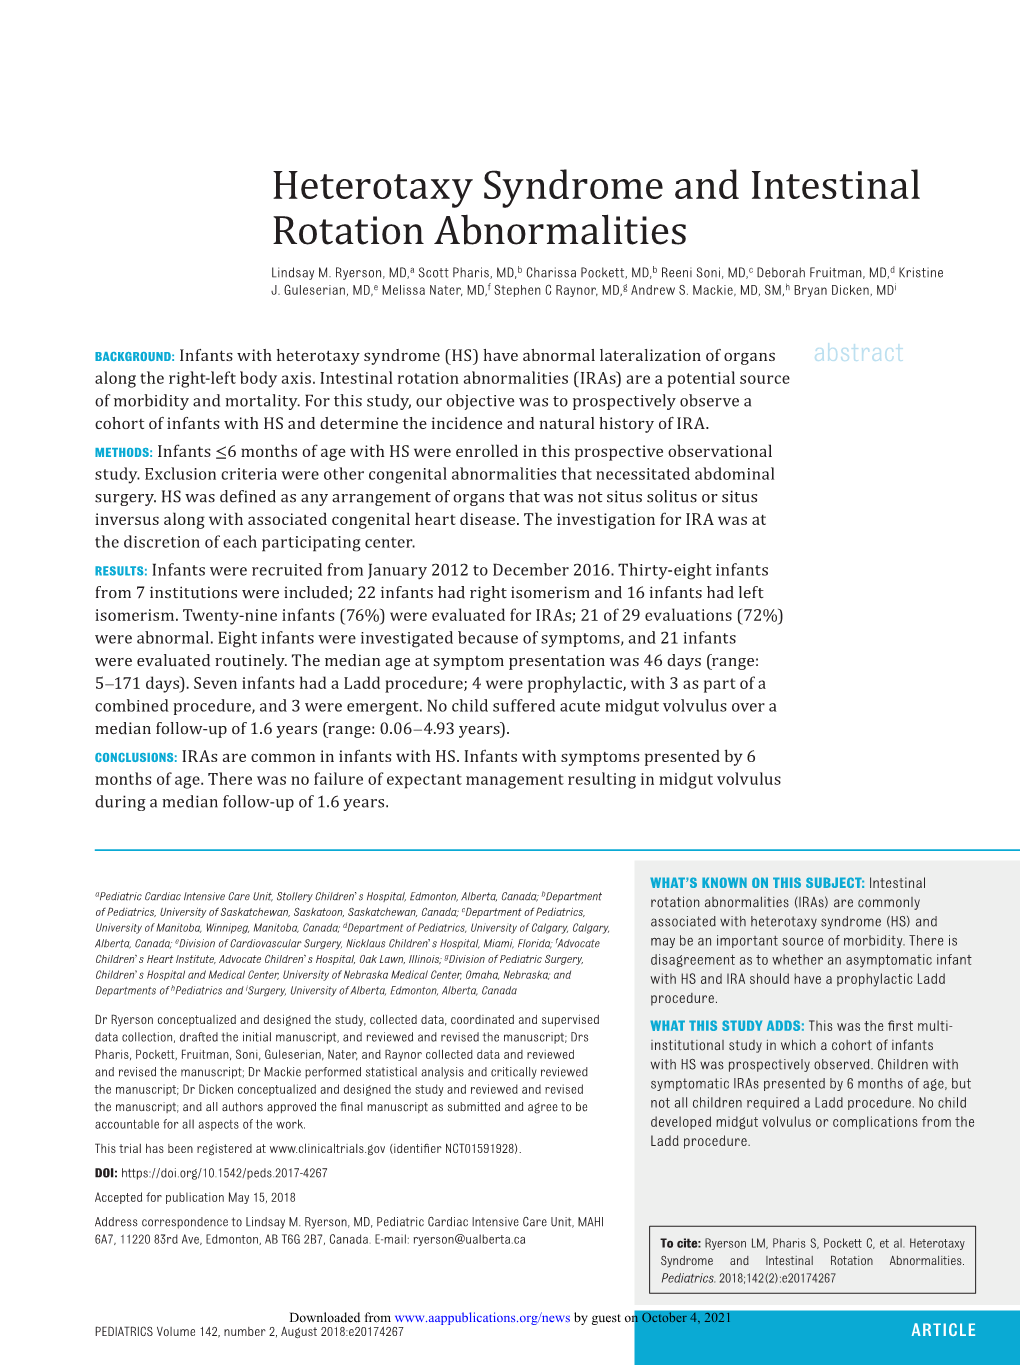 Heterotaxy Syndrome and Intestinal Rotation Abnormalities